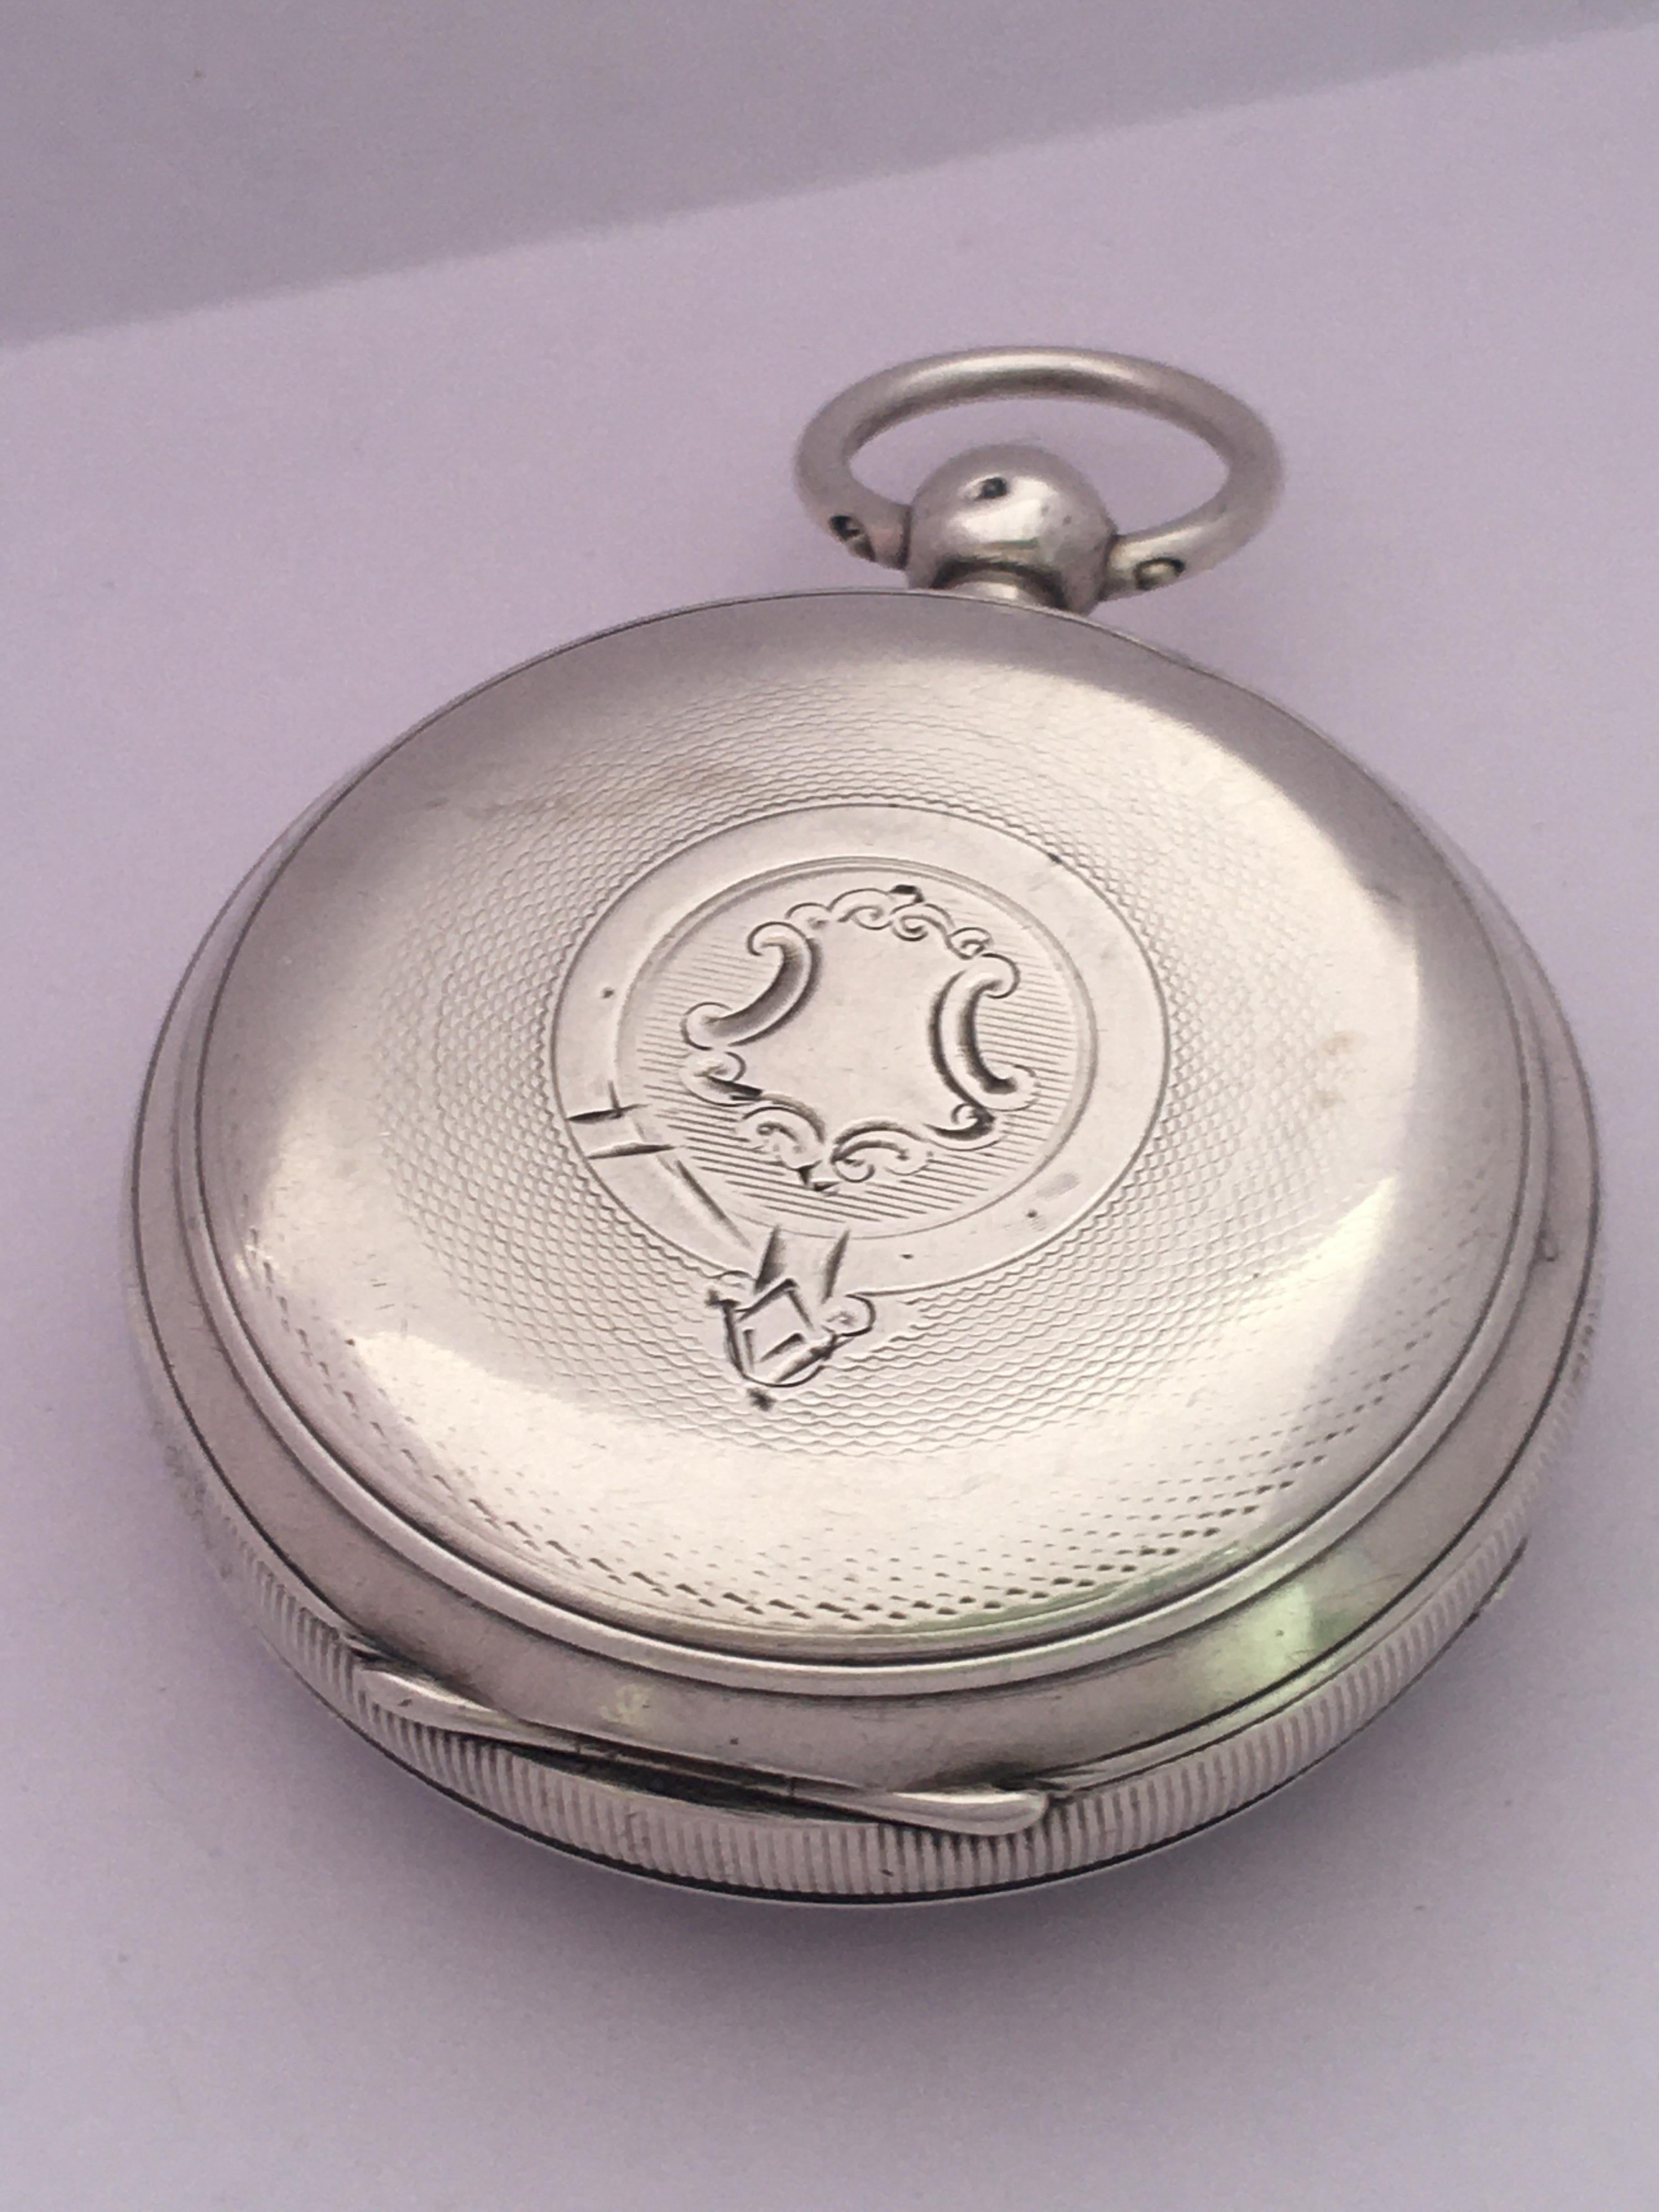 This beautiful antique 52mm diameter key winding silver pocket watch is in good working condition and it is ticking well. It is recently been serviced and it runs well. Visible signs of ageing and wear with light scratches on the glass and small